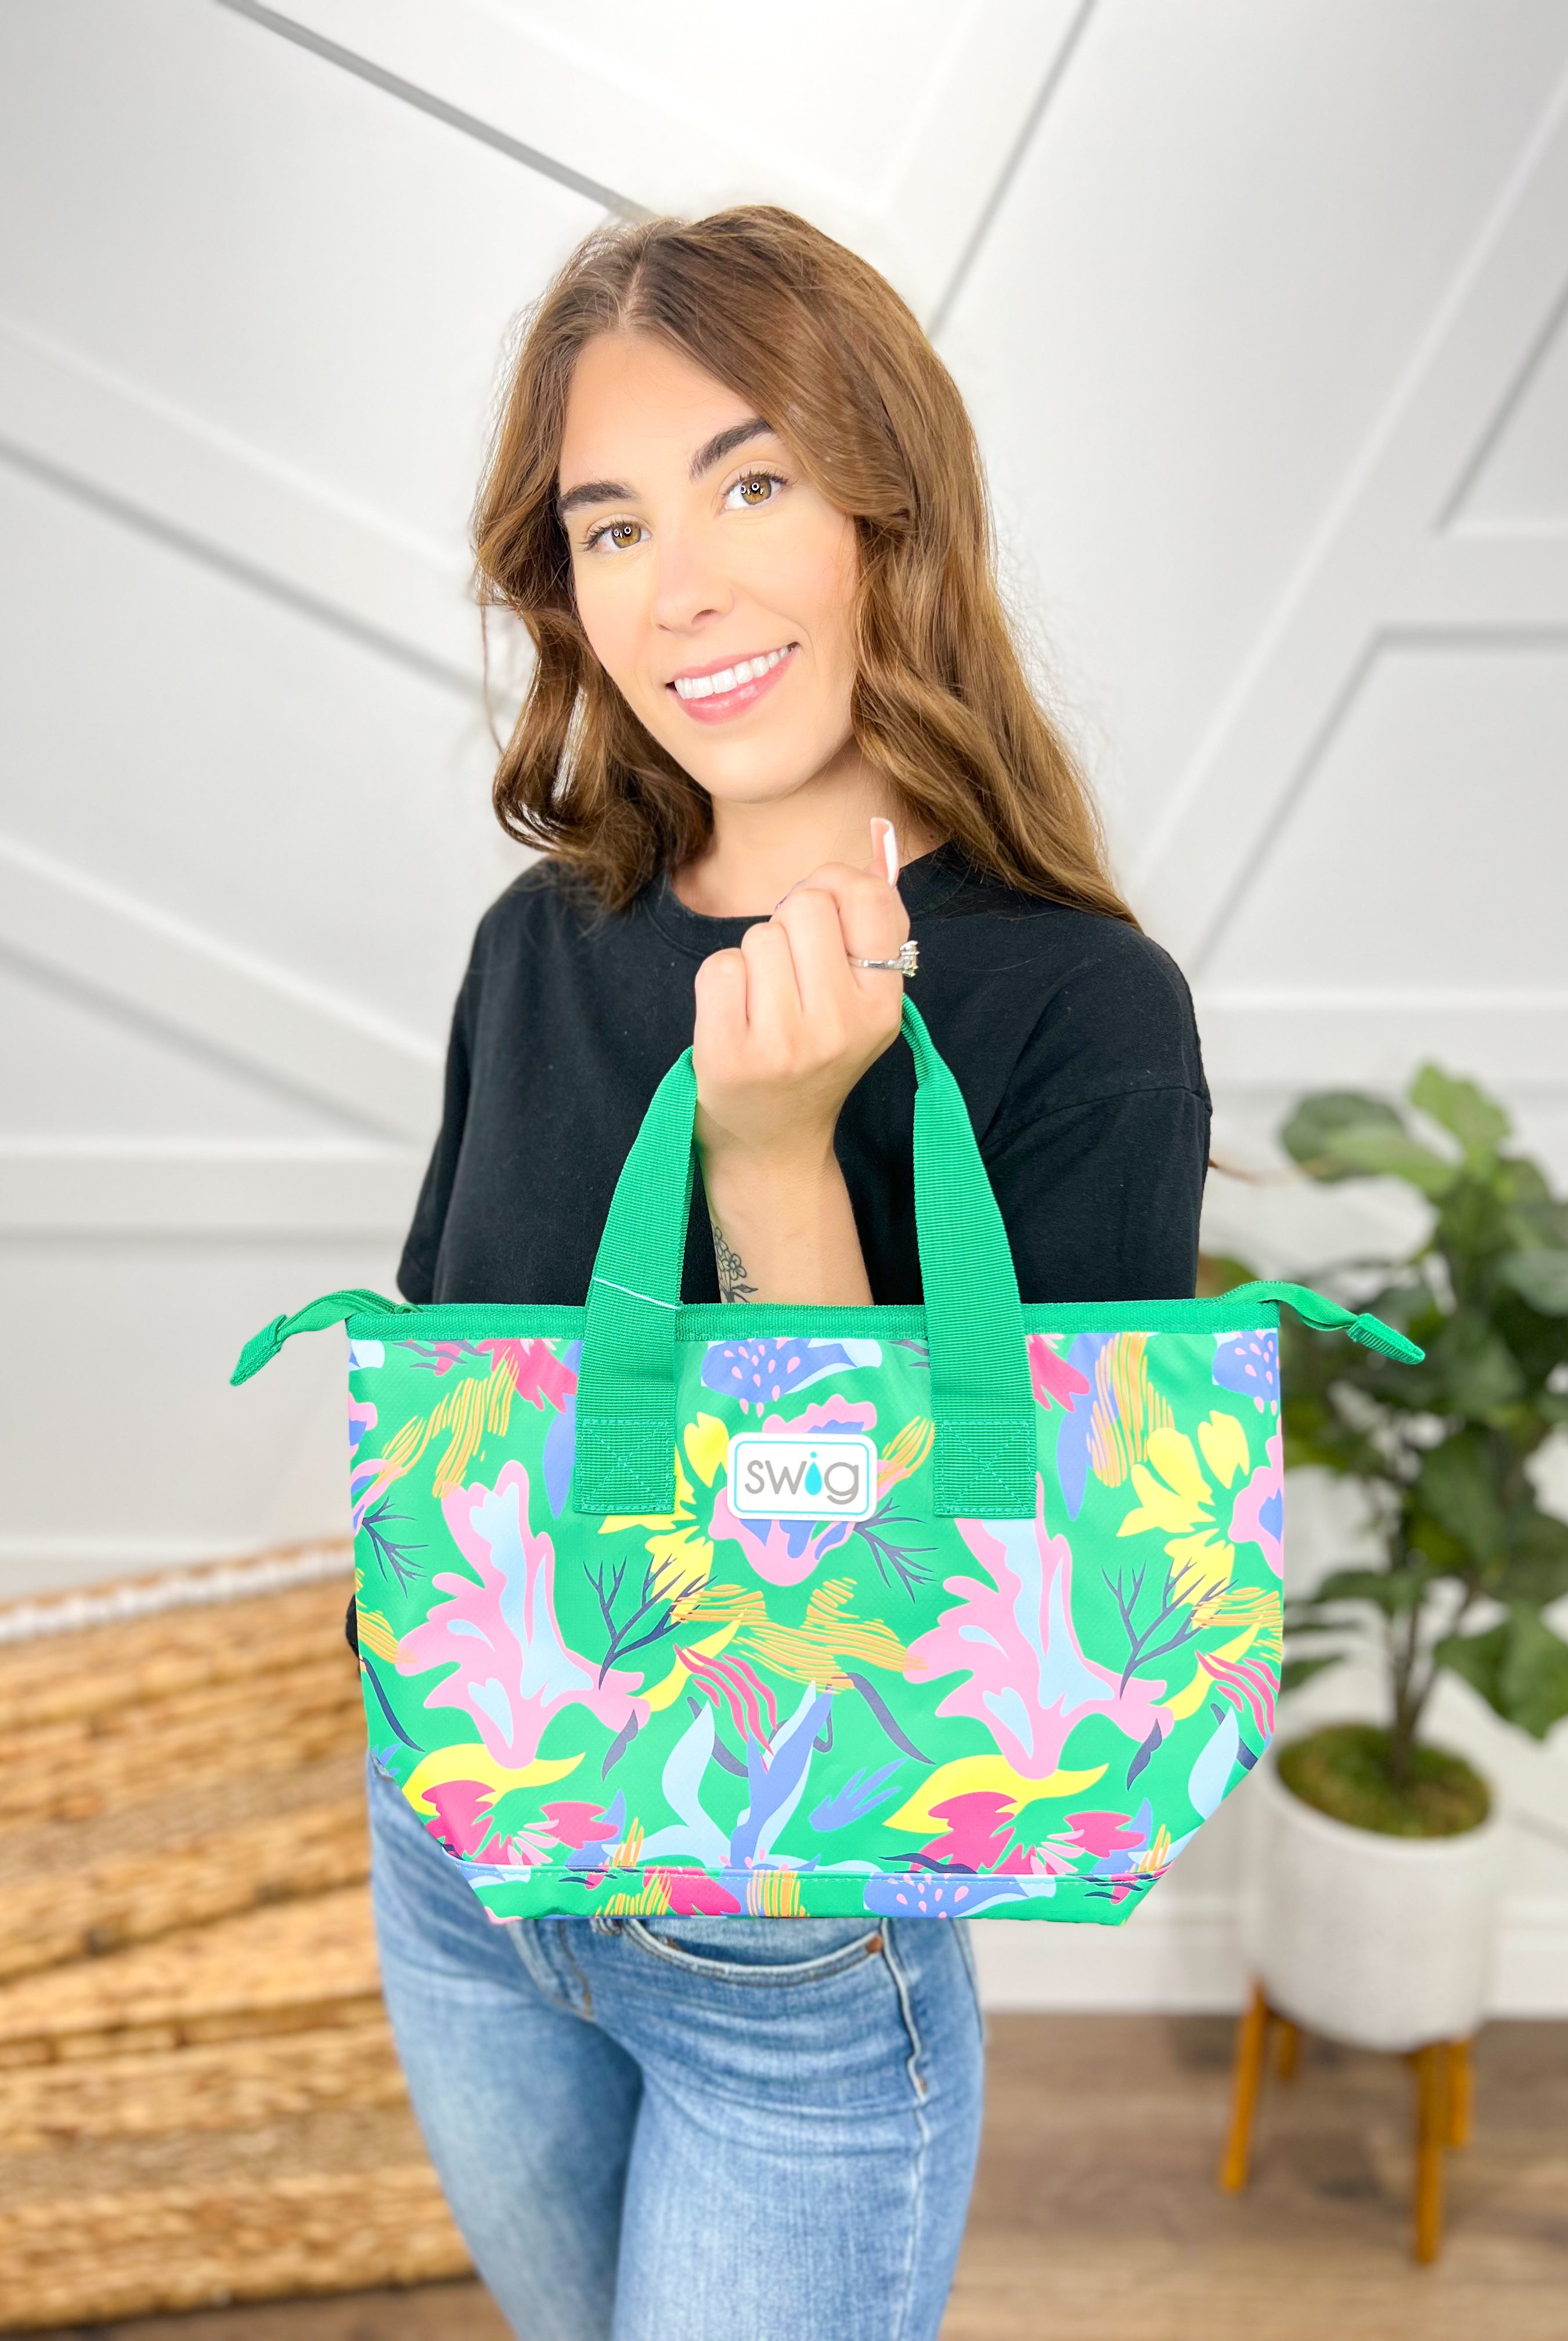 Paradise Lunchi Lunch Bag-320 Bags-Swig-Heathered Boho Boutique, Women's Fashion and Accessories in Palmetto, FL